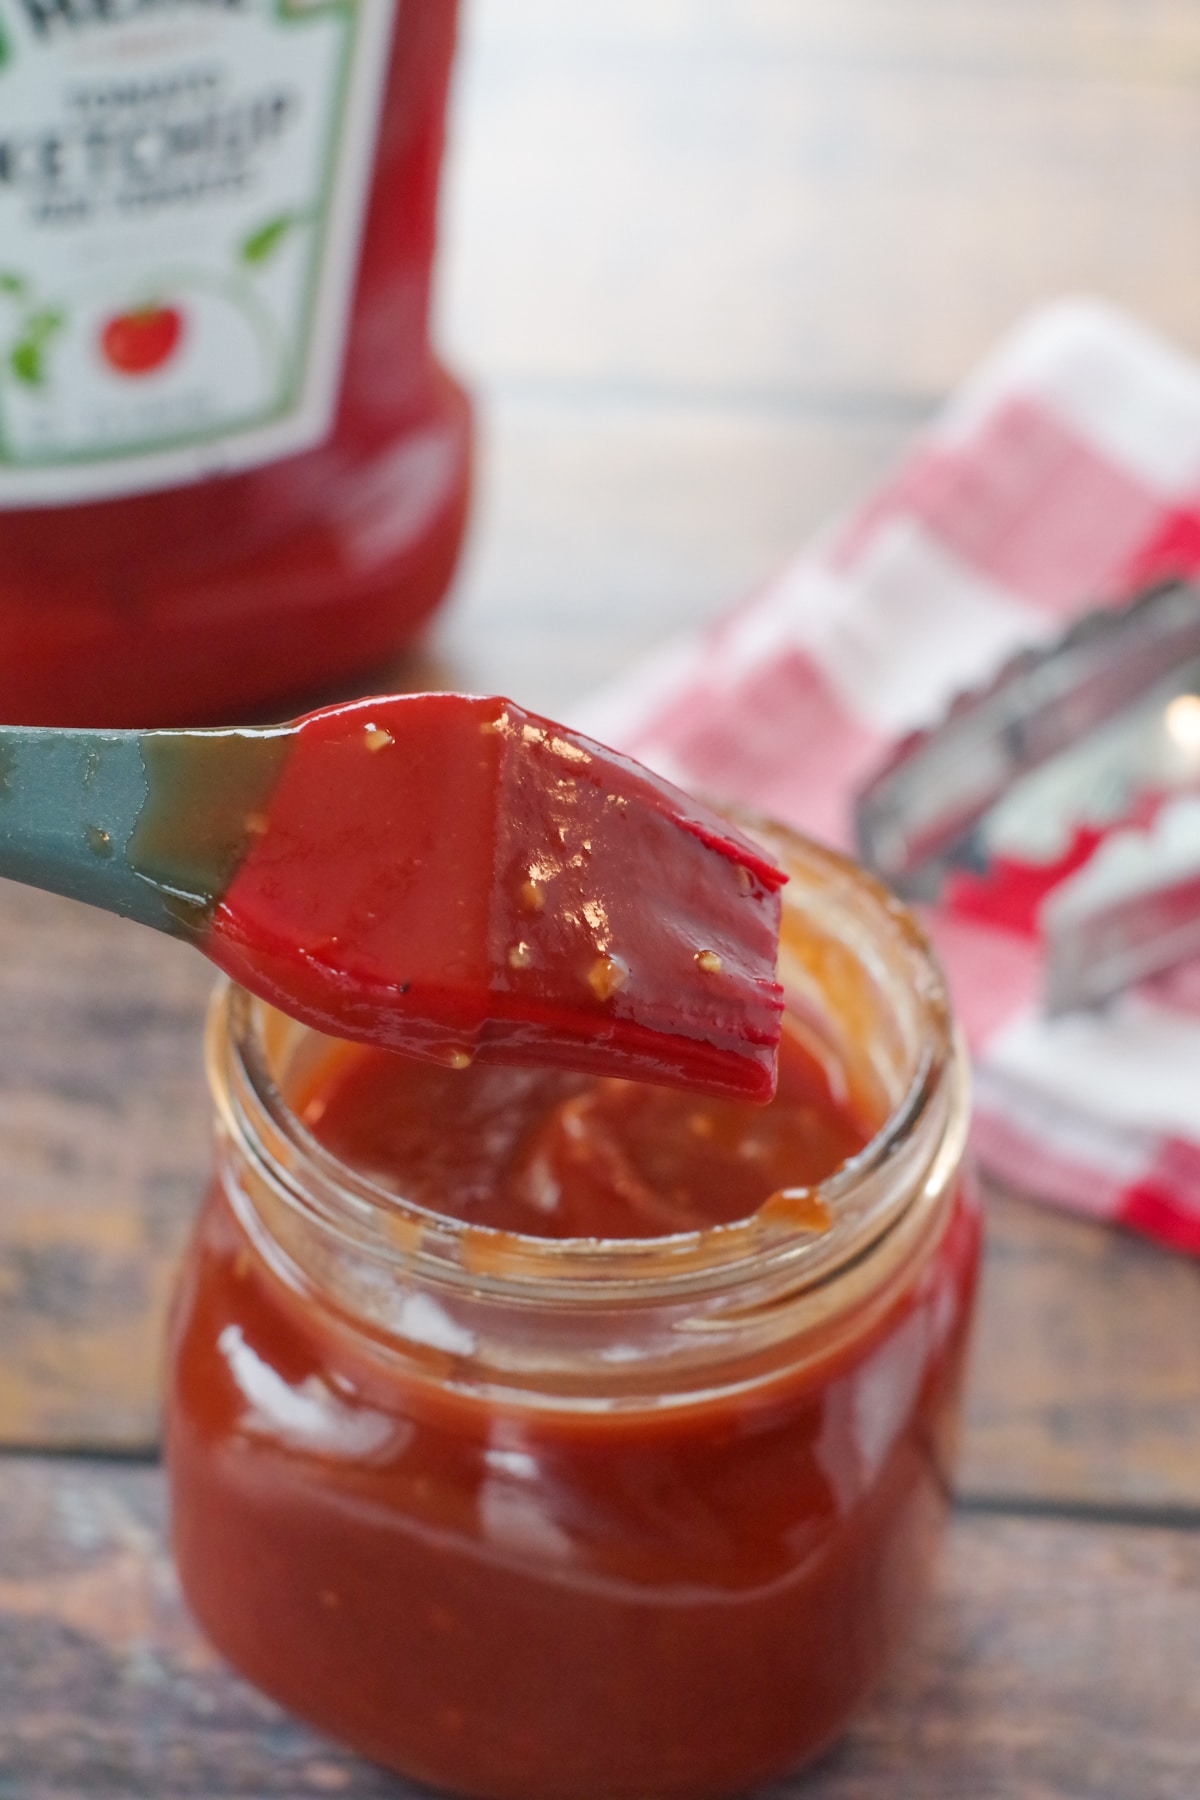 BBQ sauce with ketchup in a jar with a bottle of ketchup in the background